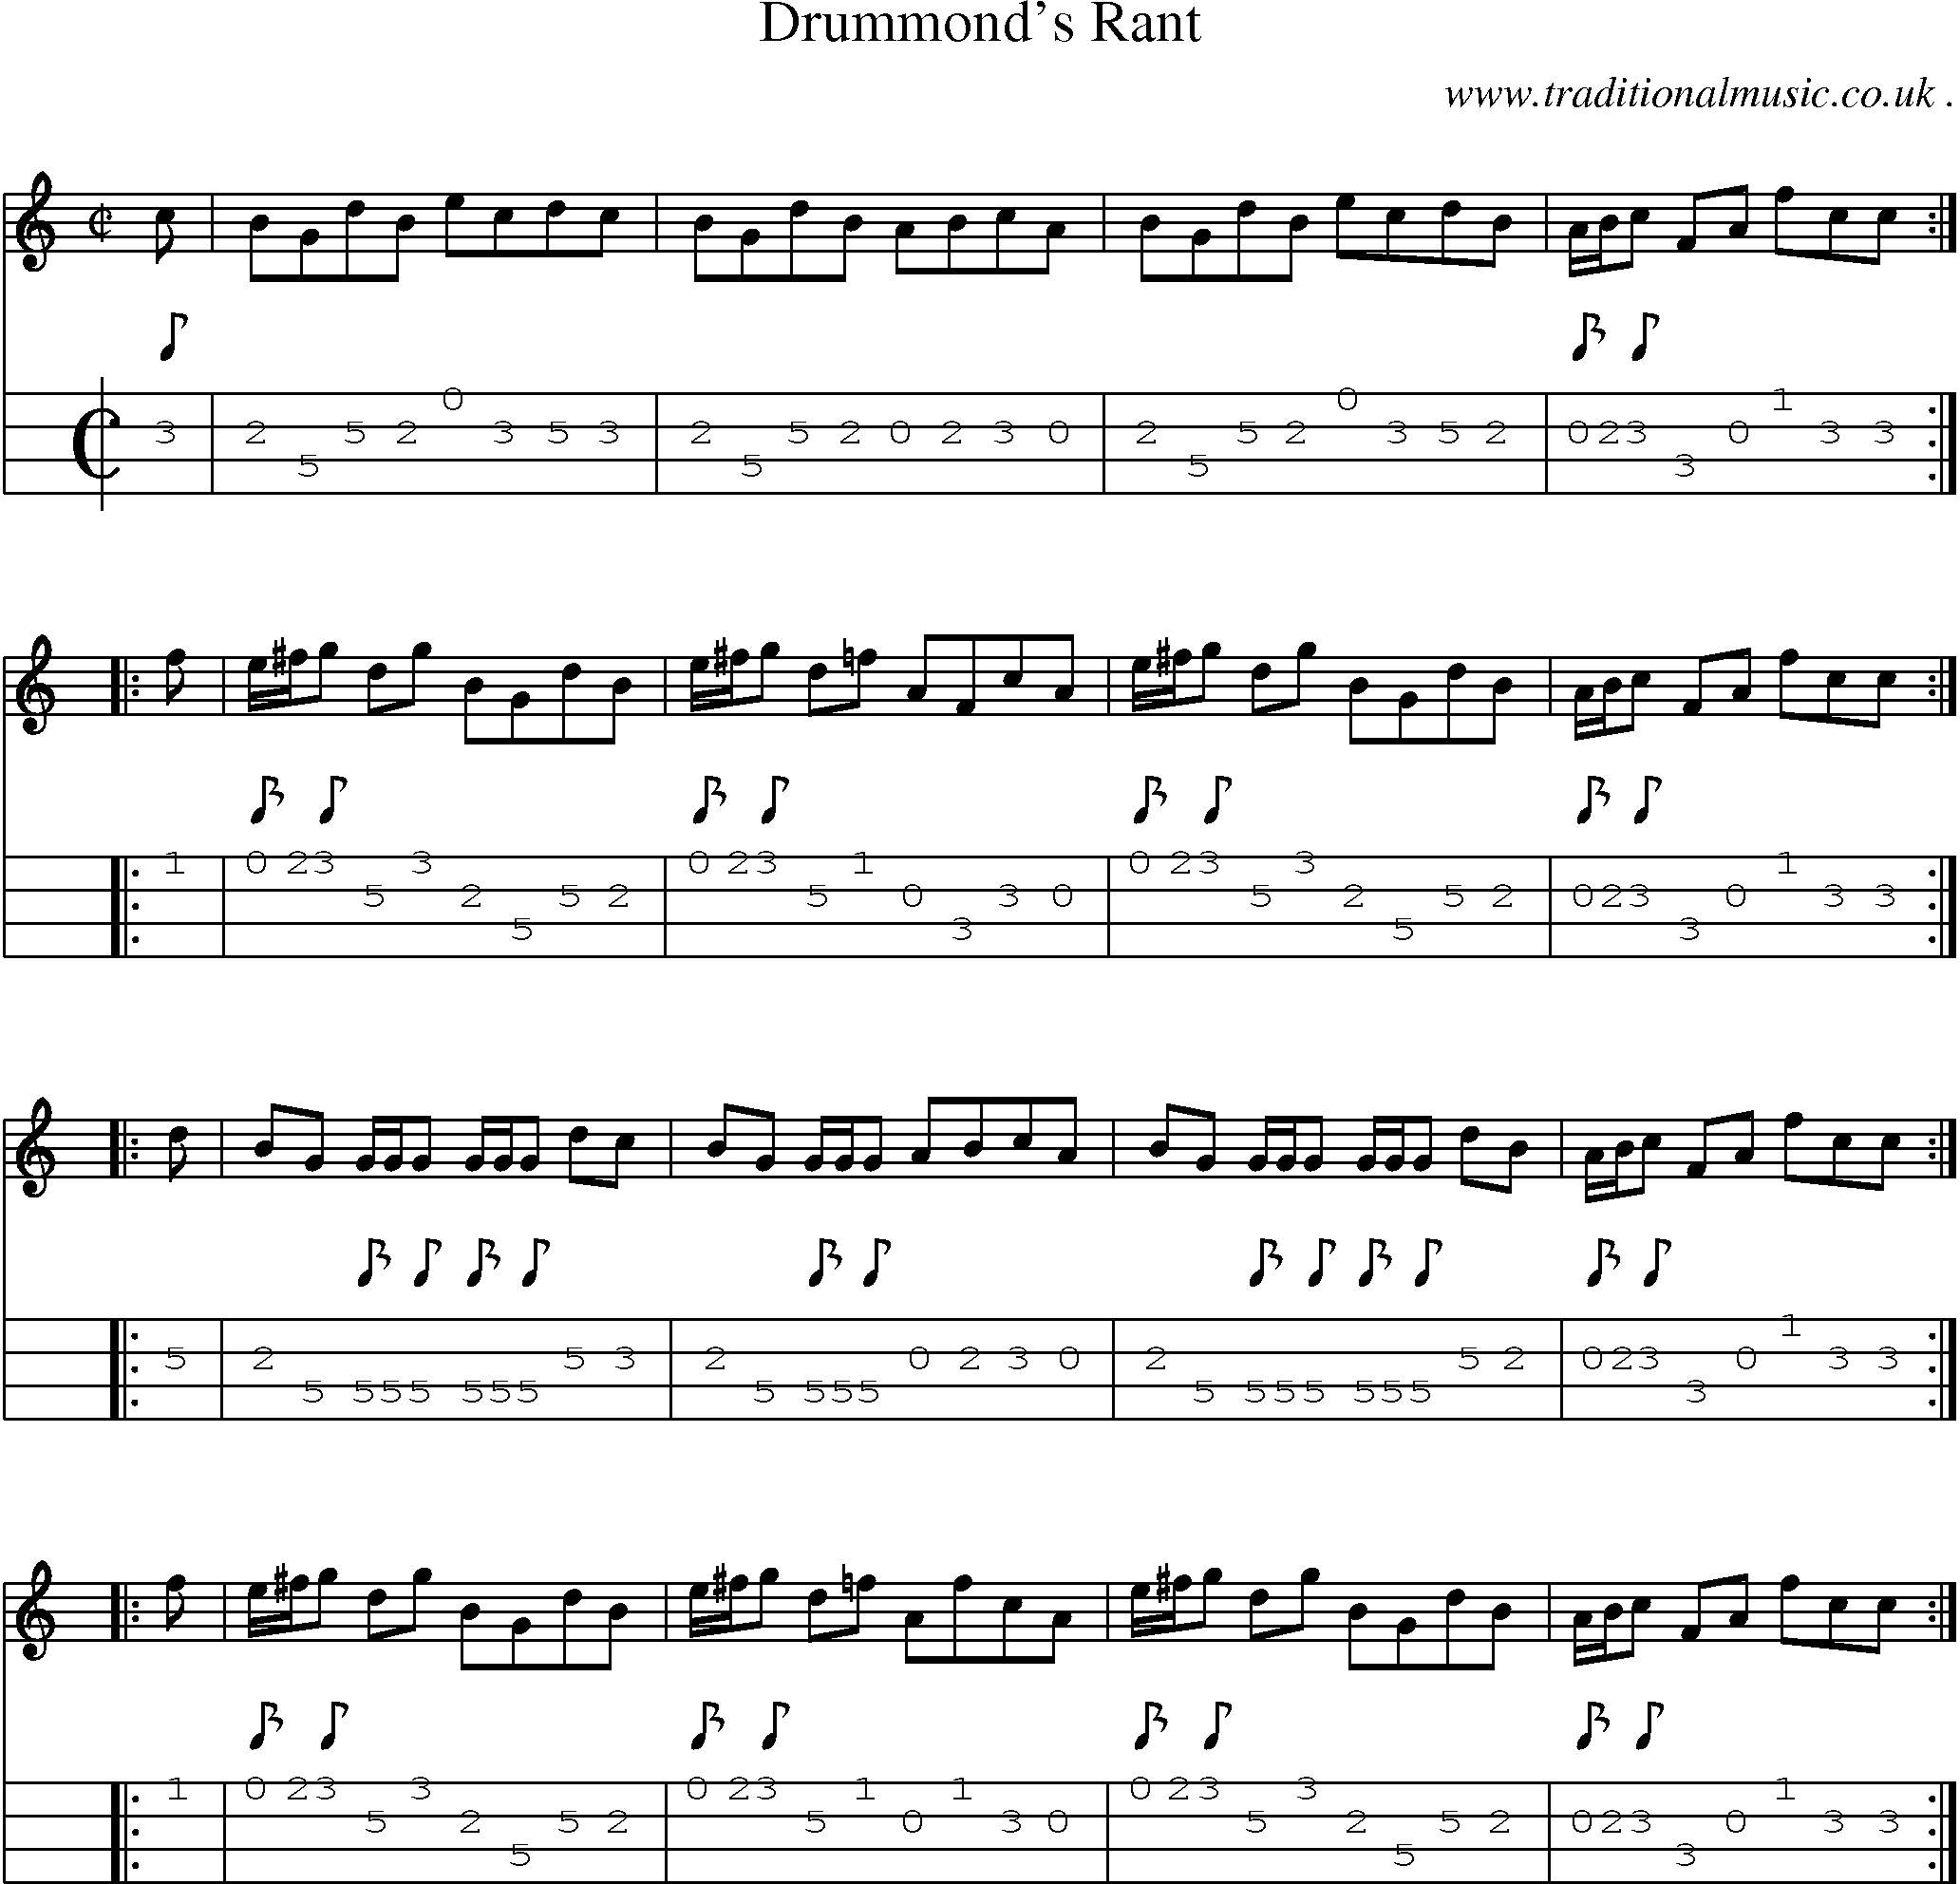 Sheet-music  score, Chords and Mandolin Tabs for Drummonds Rant